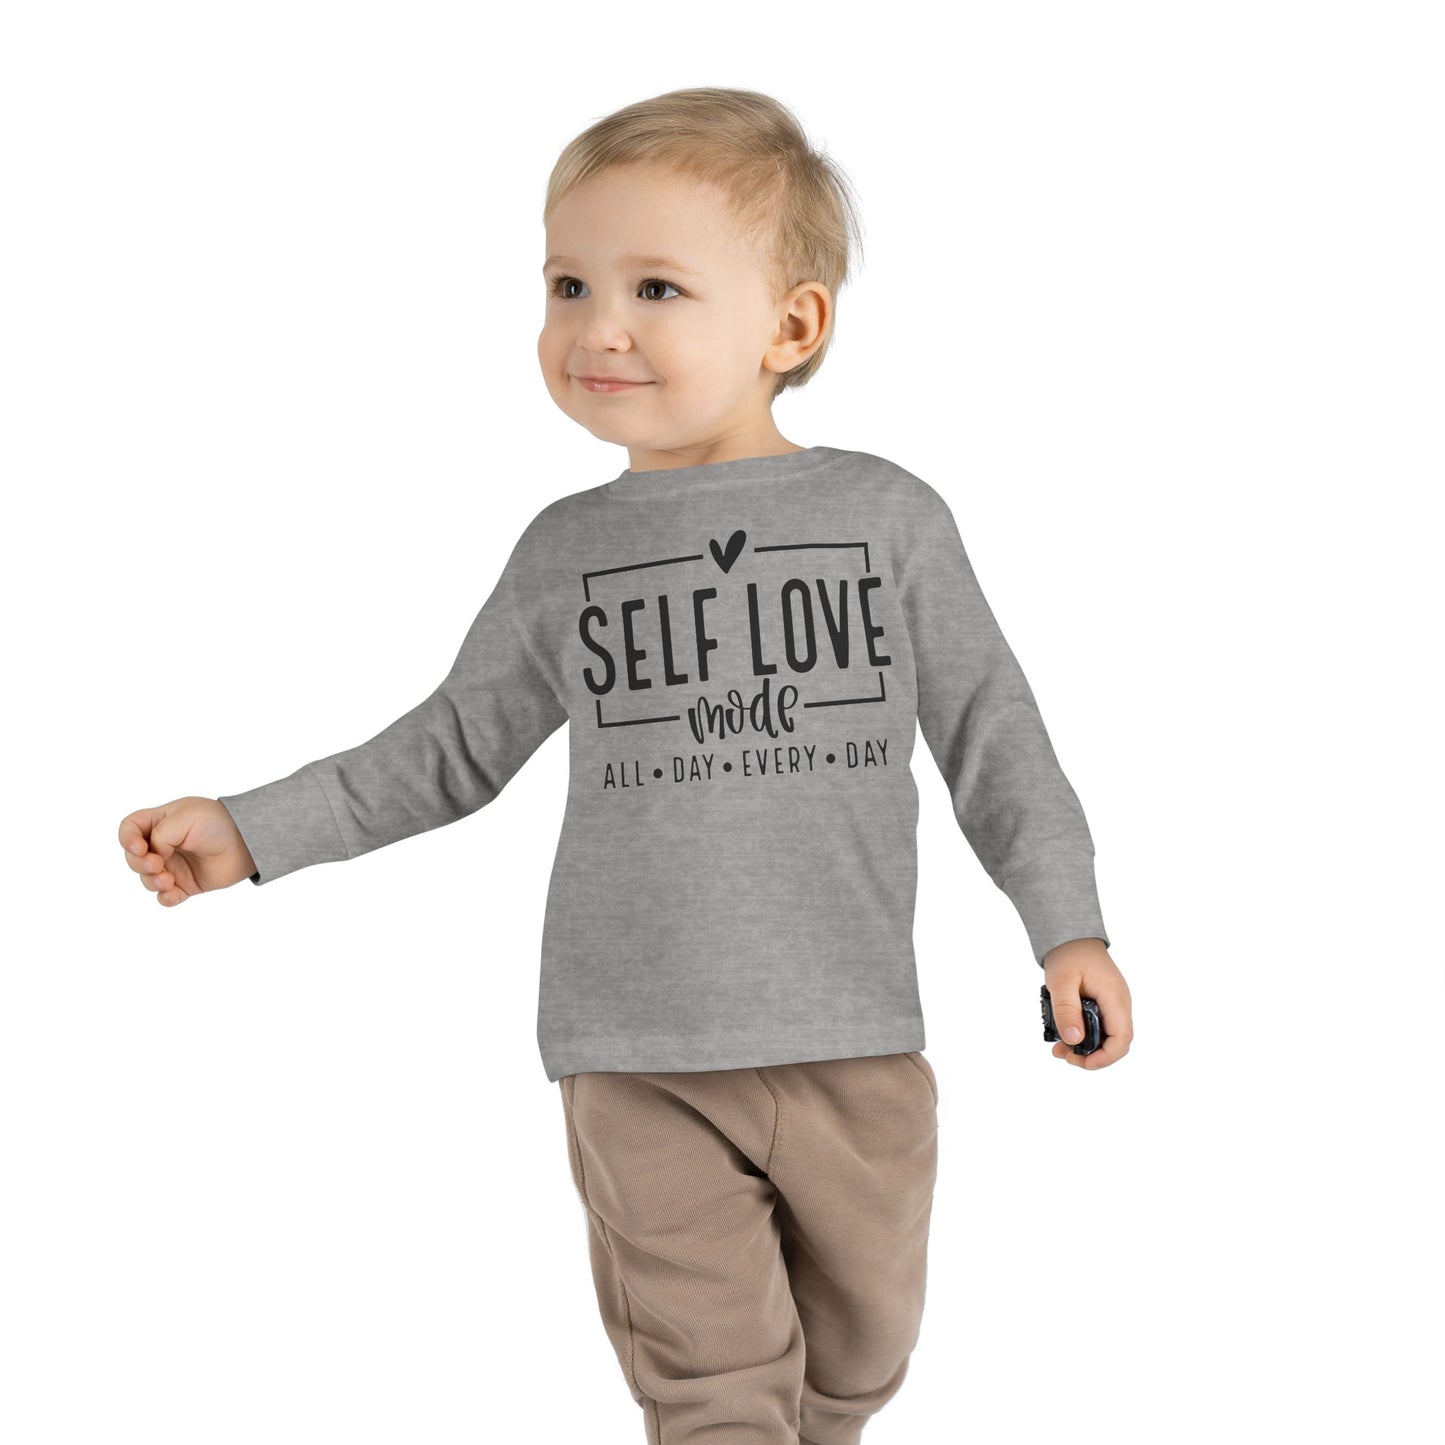 Self Love Mode - All Day Every Day - Heart - Toddler Long Sleeve Tee